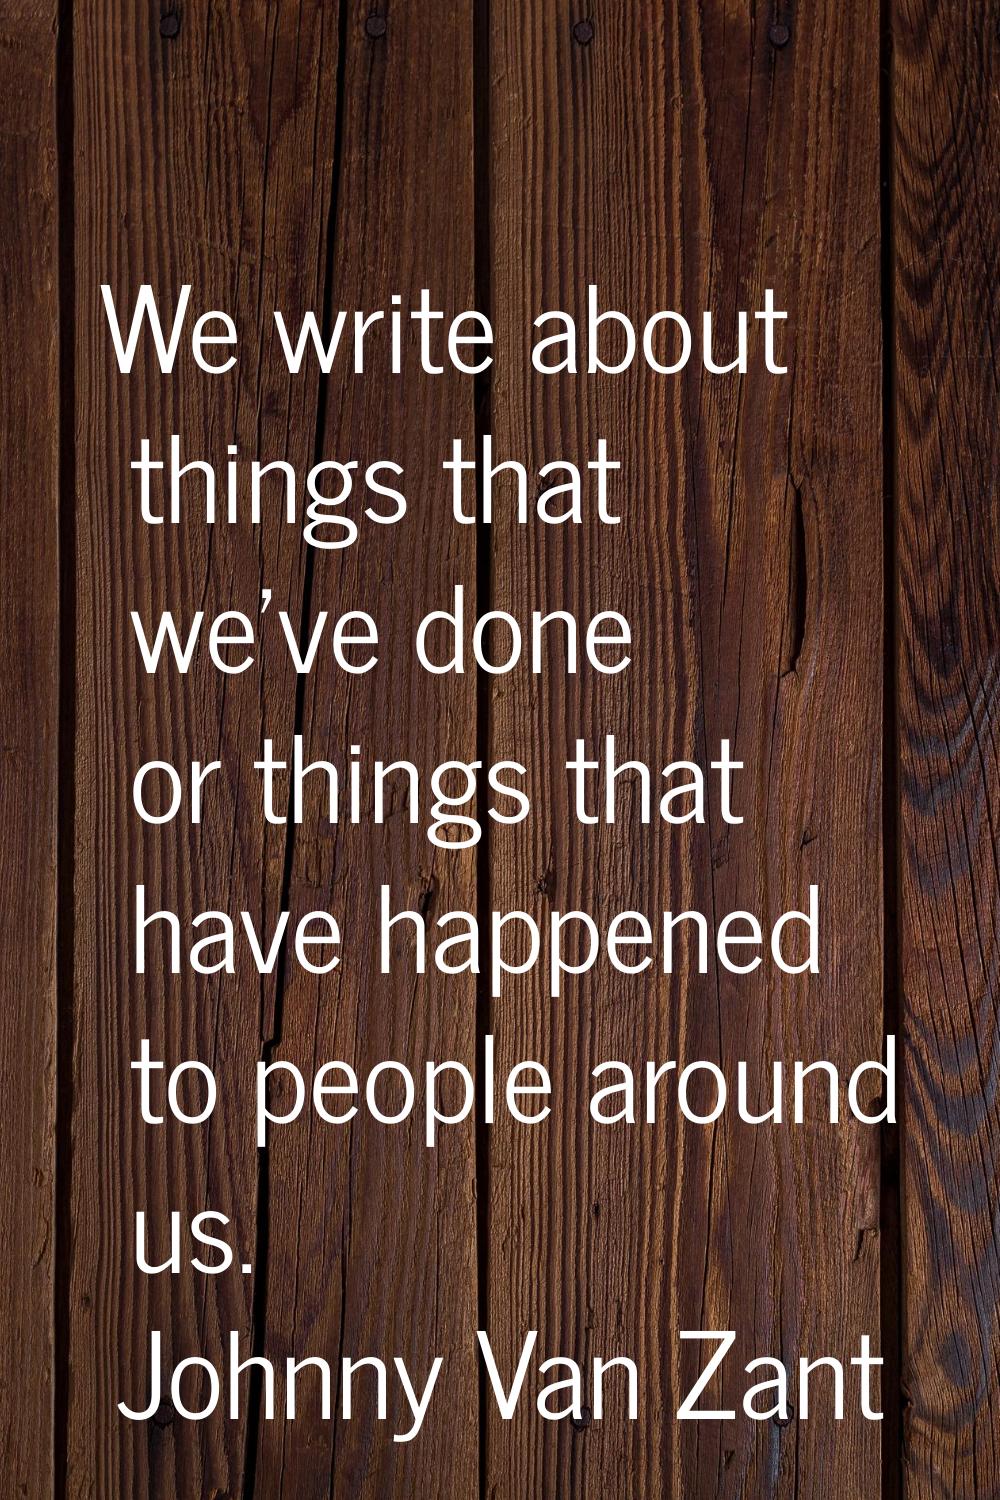 We write about things that we've done or things that have happened to people around us.